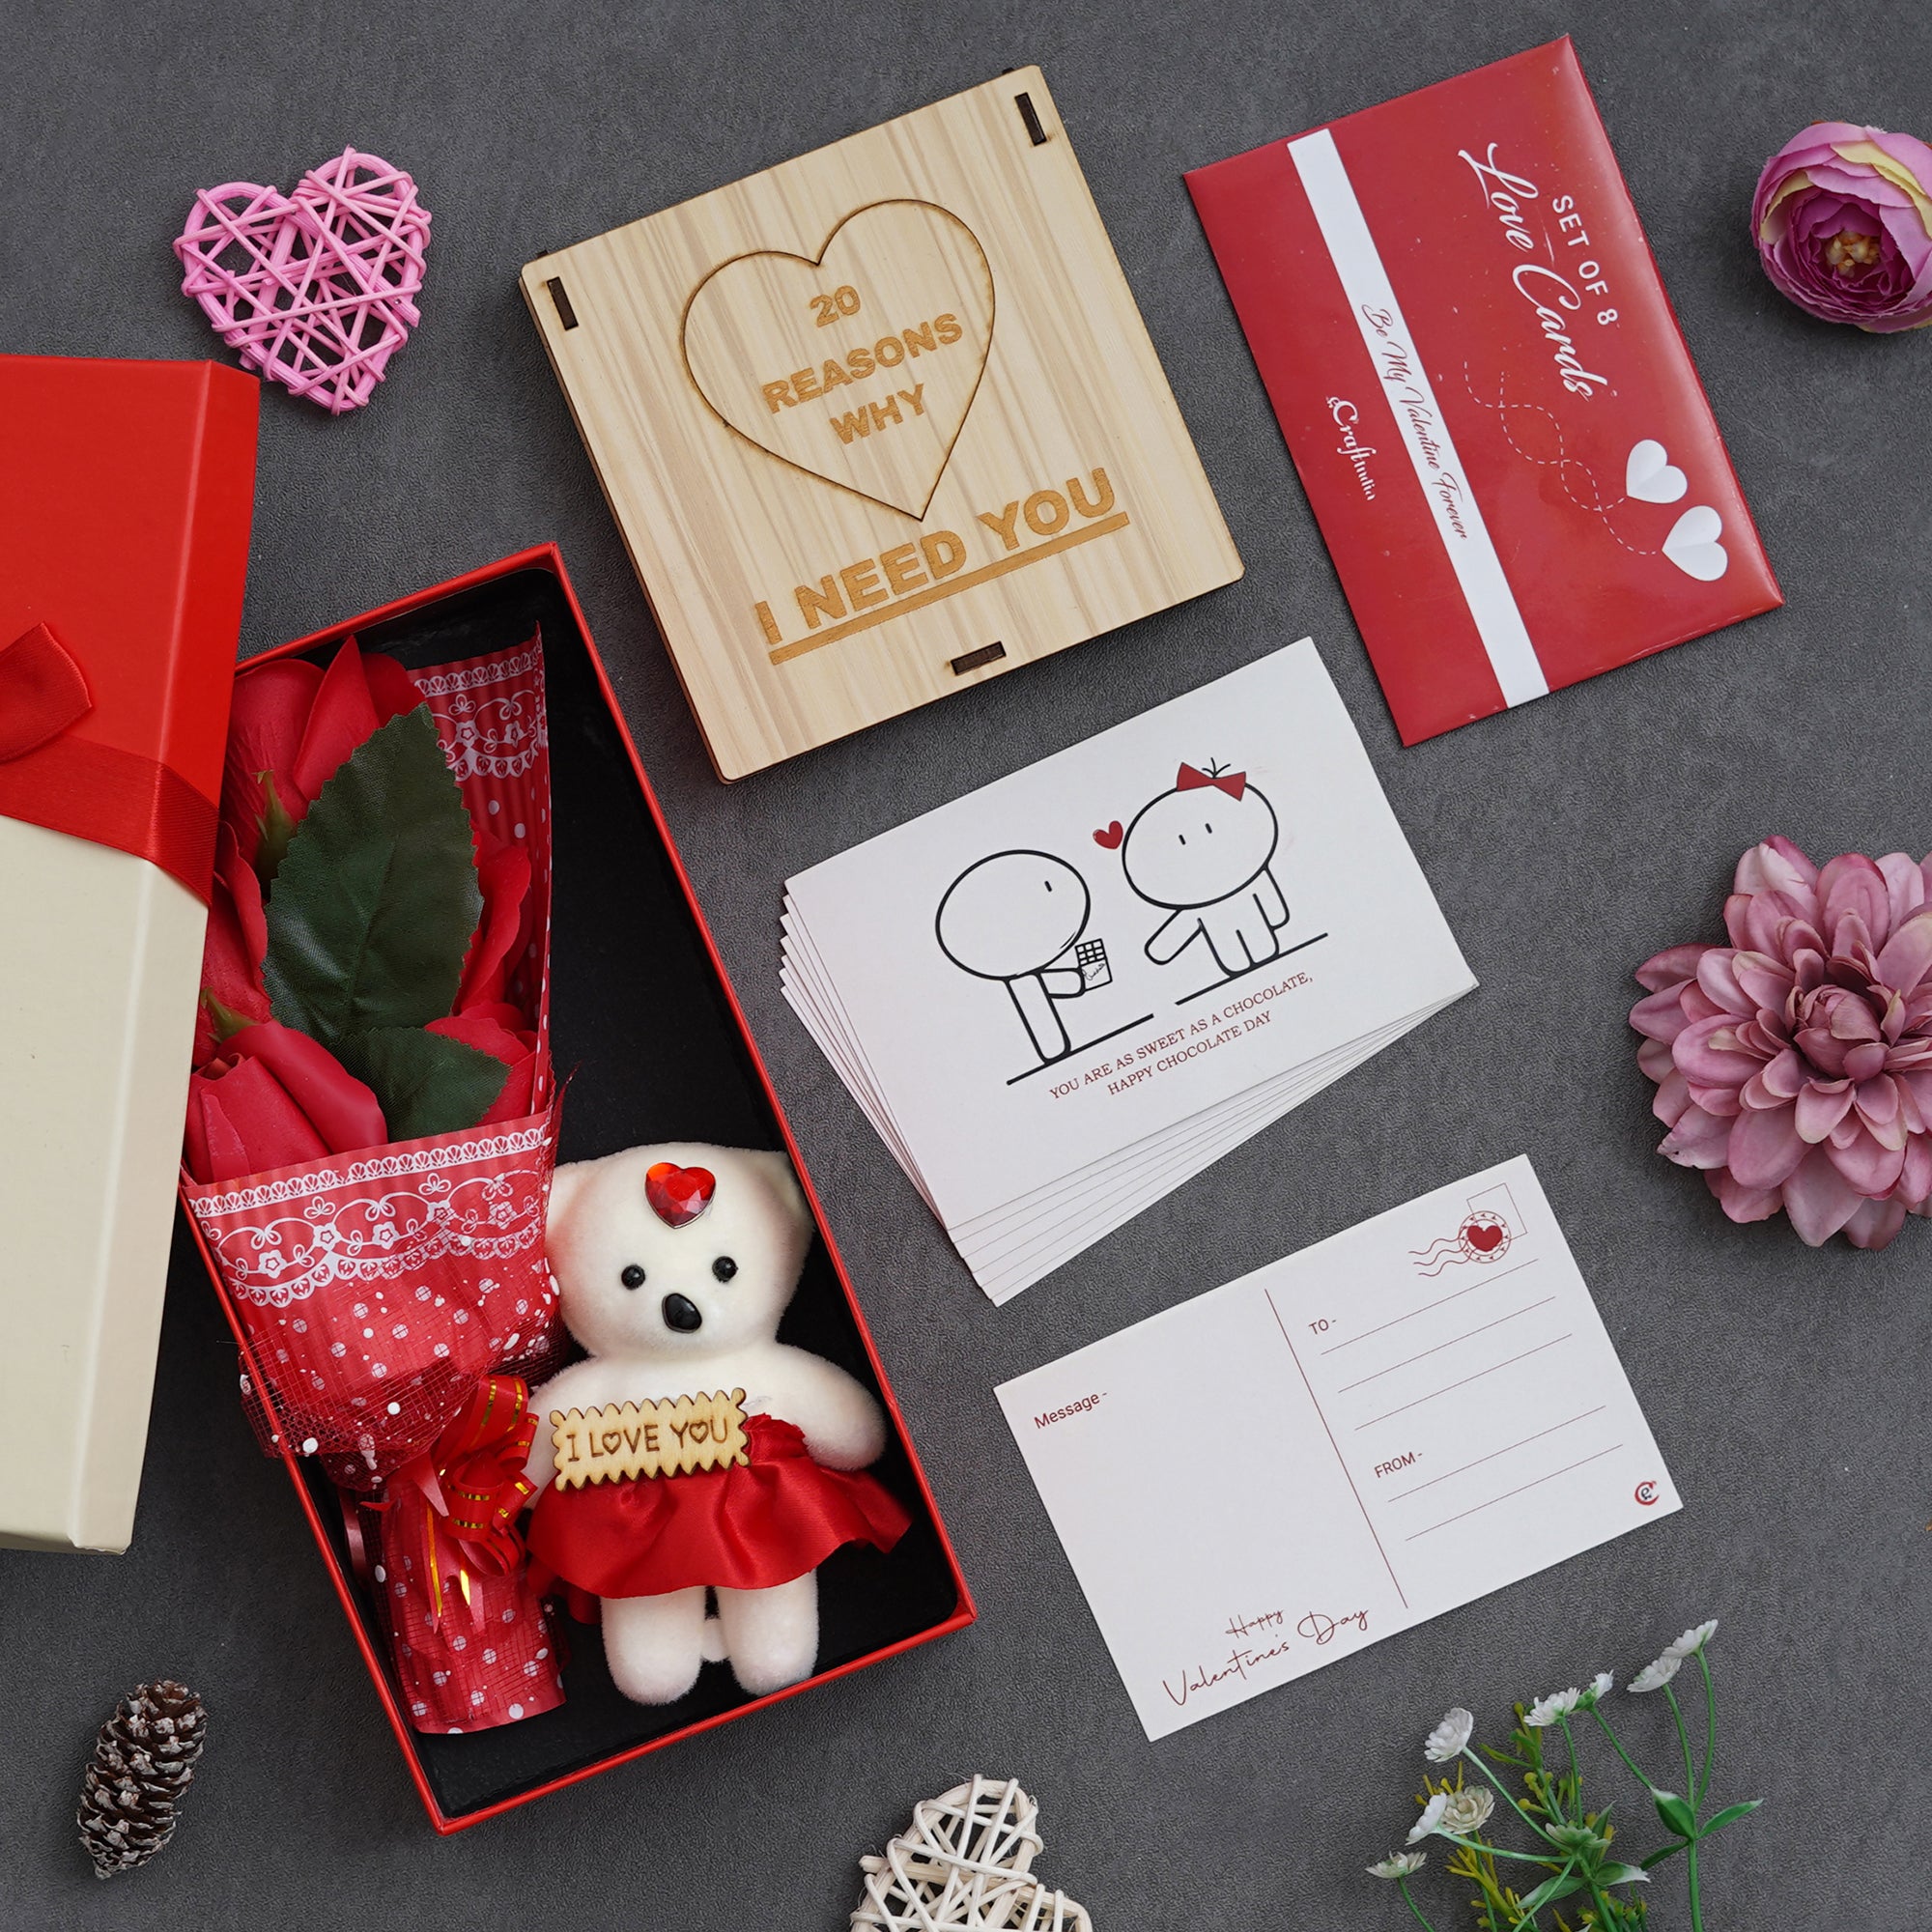 Valentine Combo of Set of 8 Love Post Cards Gift Cards Set, "20 Reasons Why I Need You" Printed on Little Hearts Wooden Gift Set, Red Roses Bouquet and White, Red Teddy Bear Valentine's Rectangle Shaped Gift Box